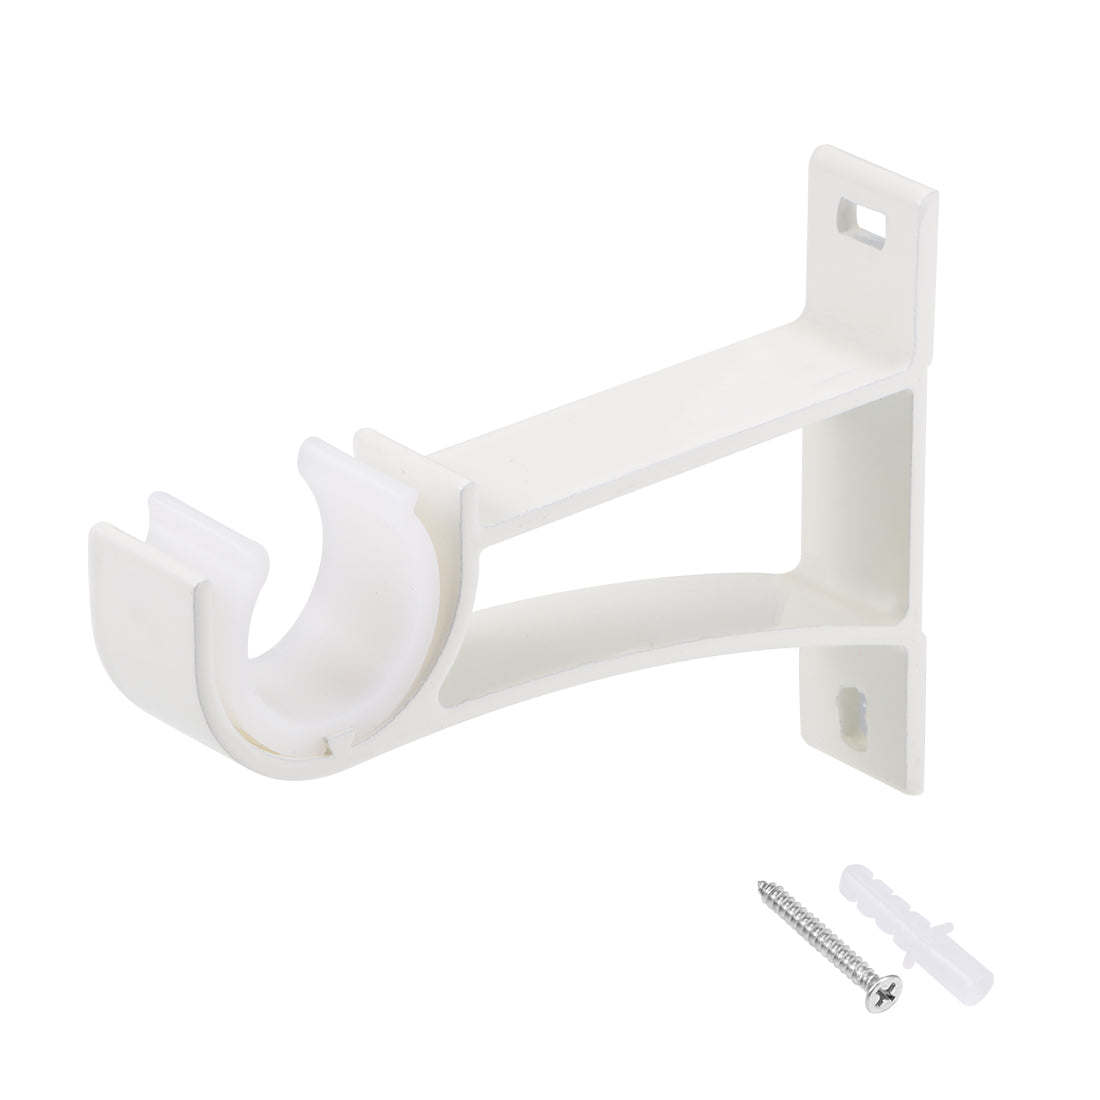 uxcell Uxcell Curtain Rod Bracket Aluminum Alloy Single Holder Support for 24mm Drapery Rod, 108 x 80 x 19mm Beige